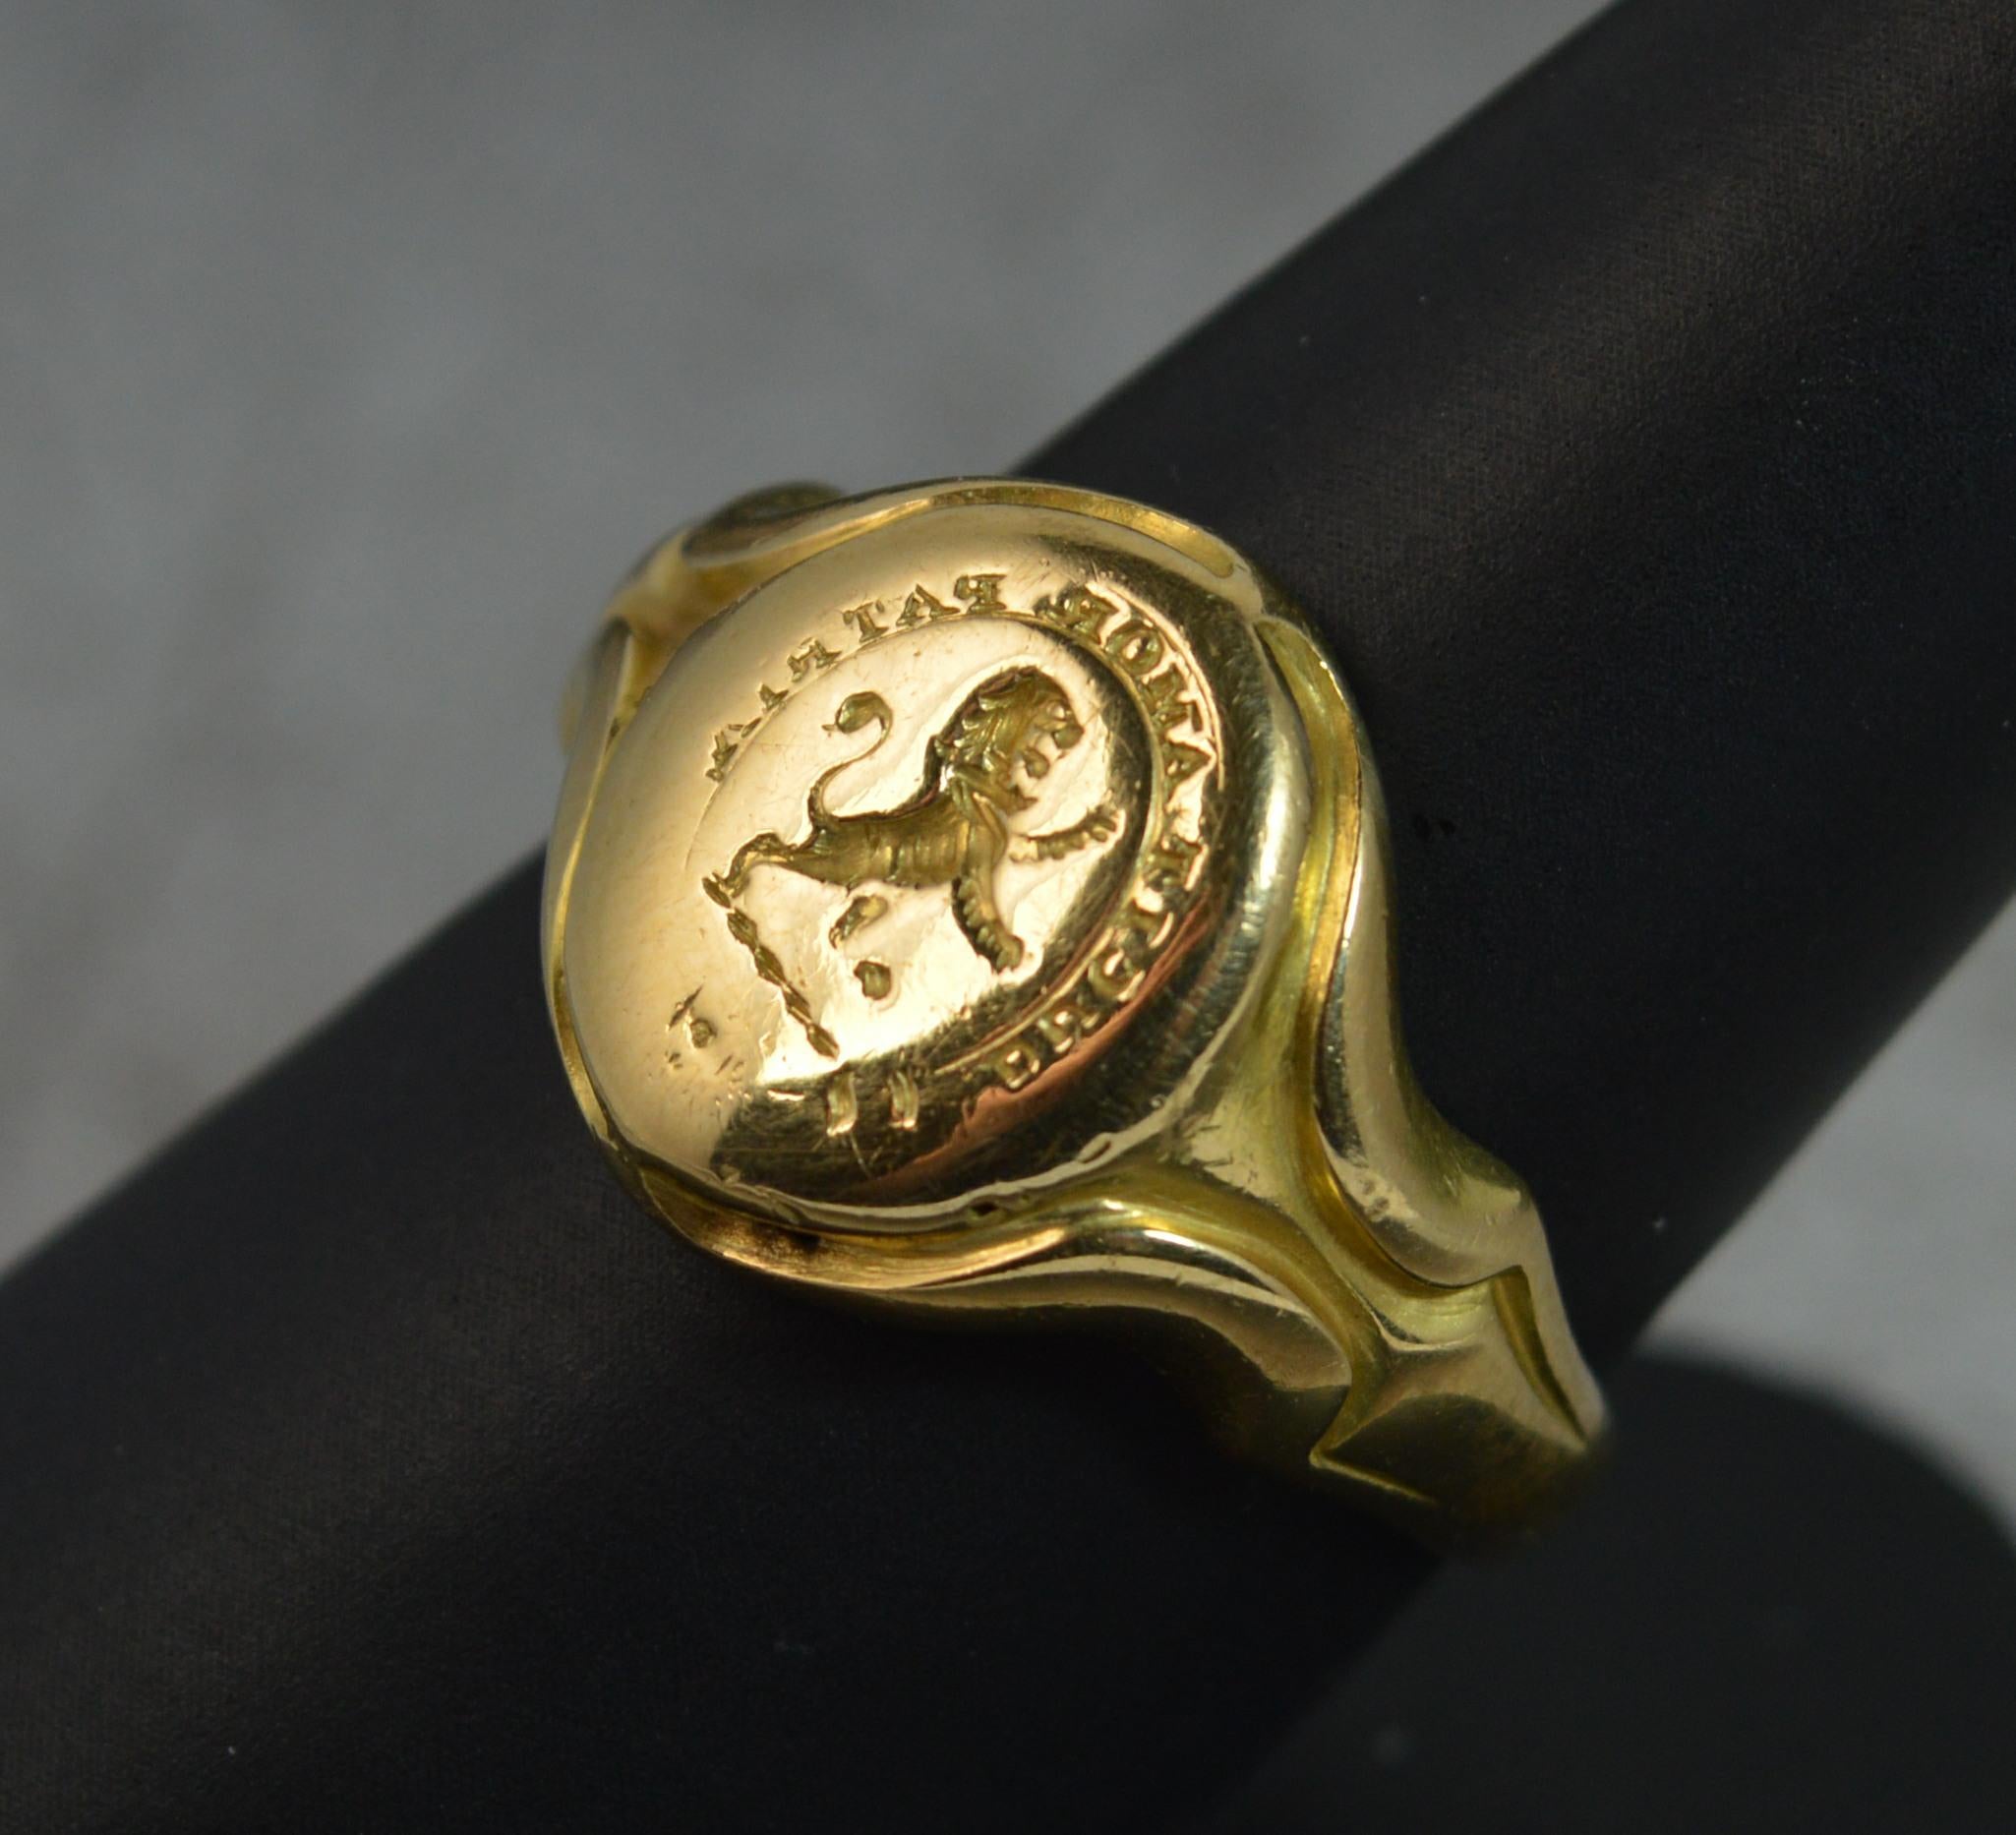 A superb intaglio seal signet ring. c1880.
Solid 18 carat yellow gold example.
Designed with a family crest which depicts a lion passant to centre with Latin moto border which translates to The Love of The Country Leads Me.
12mm x 15mm head